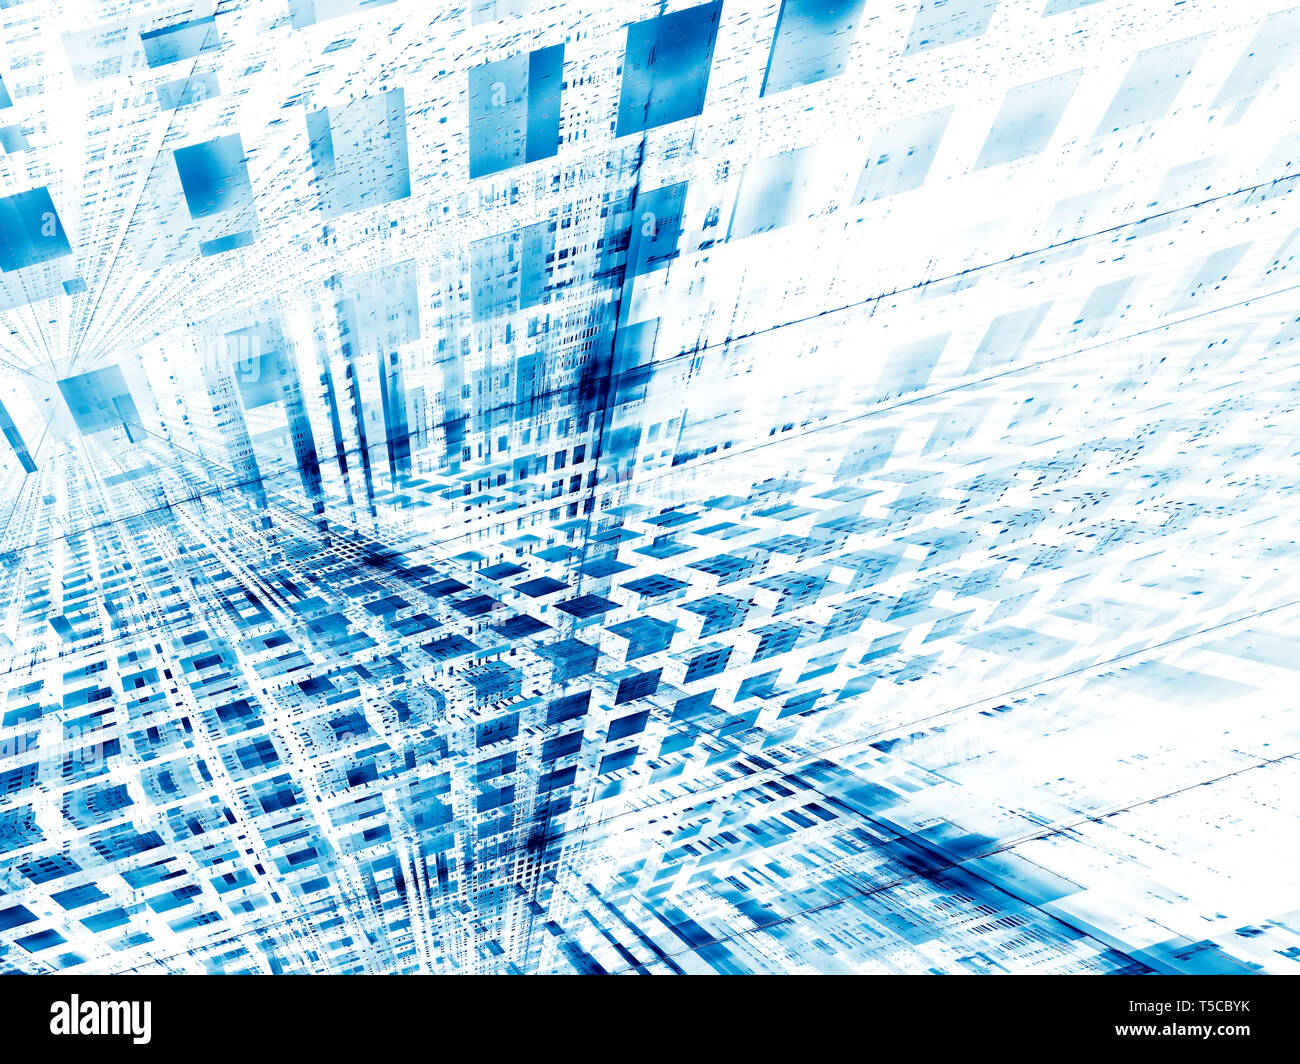 Futuristic structure - tech style abstract digitally generated image Stock Photo